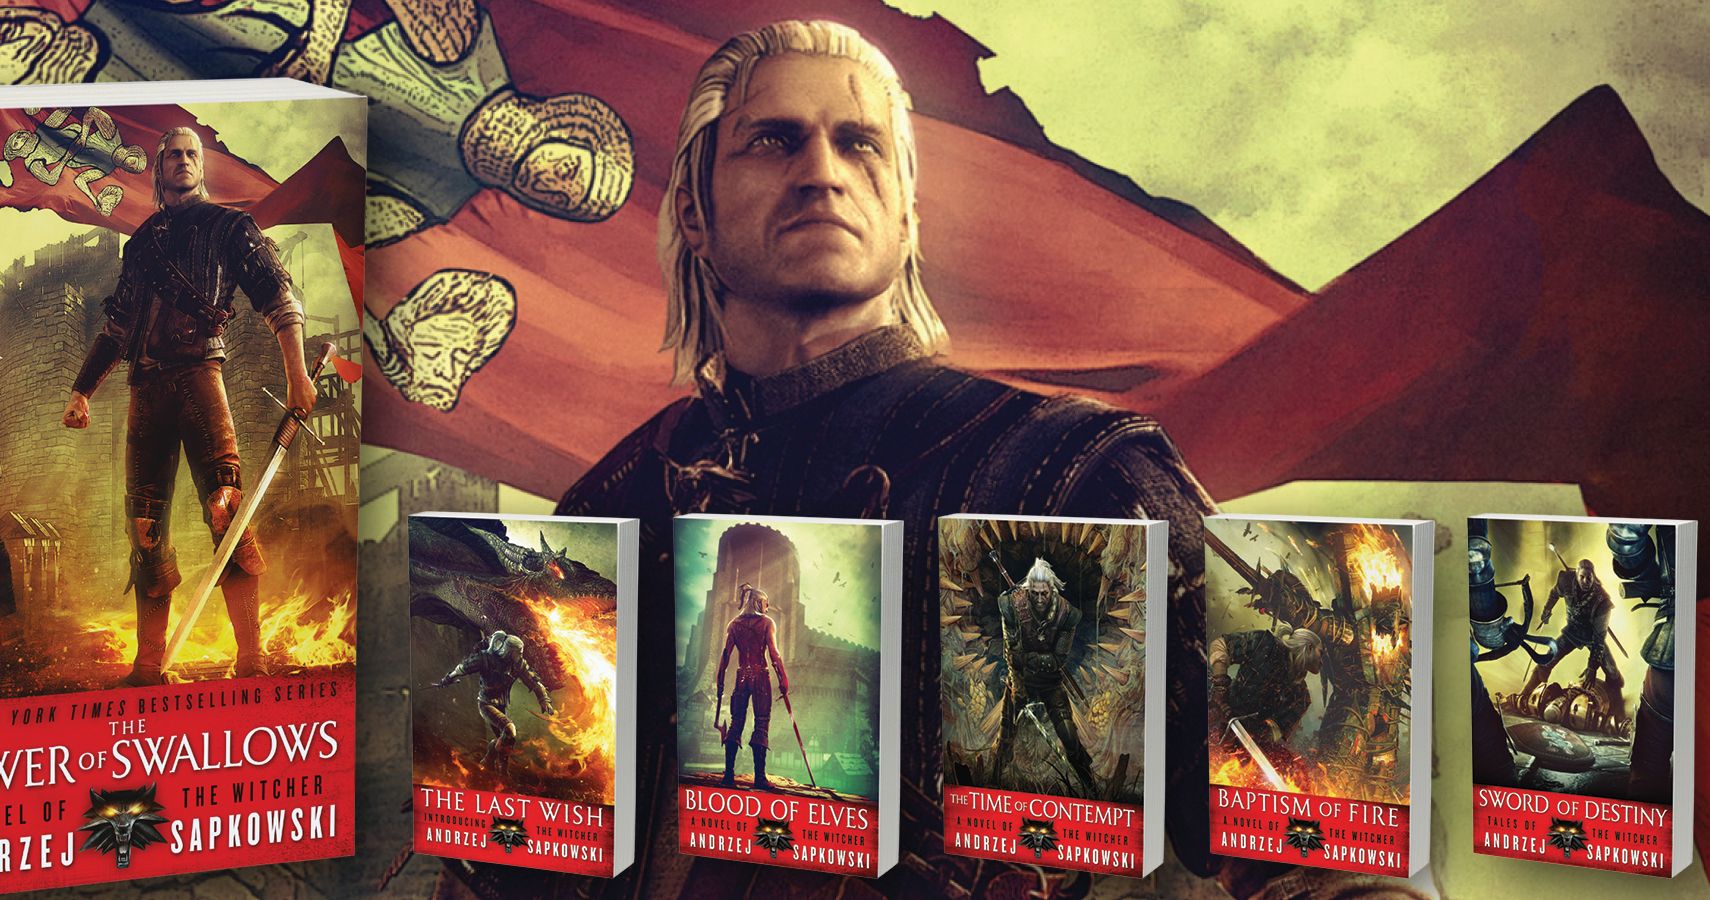 In What Order Should You Read The Witcher Books